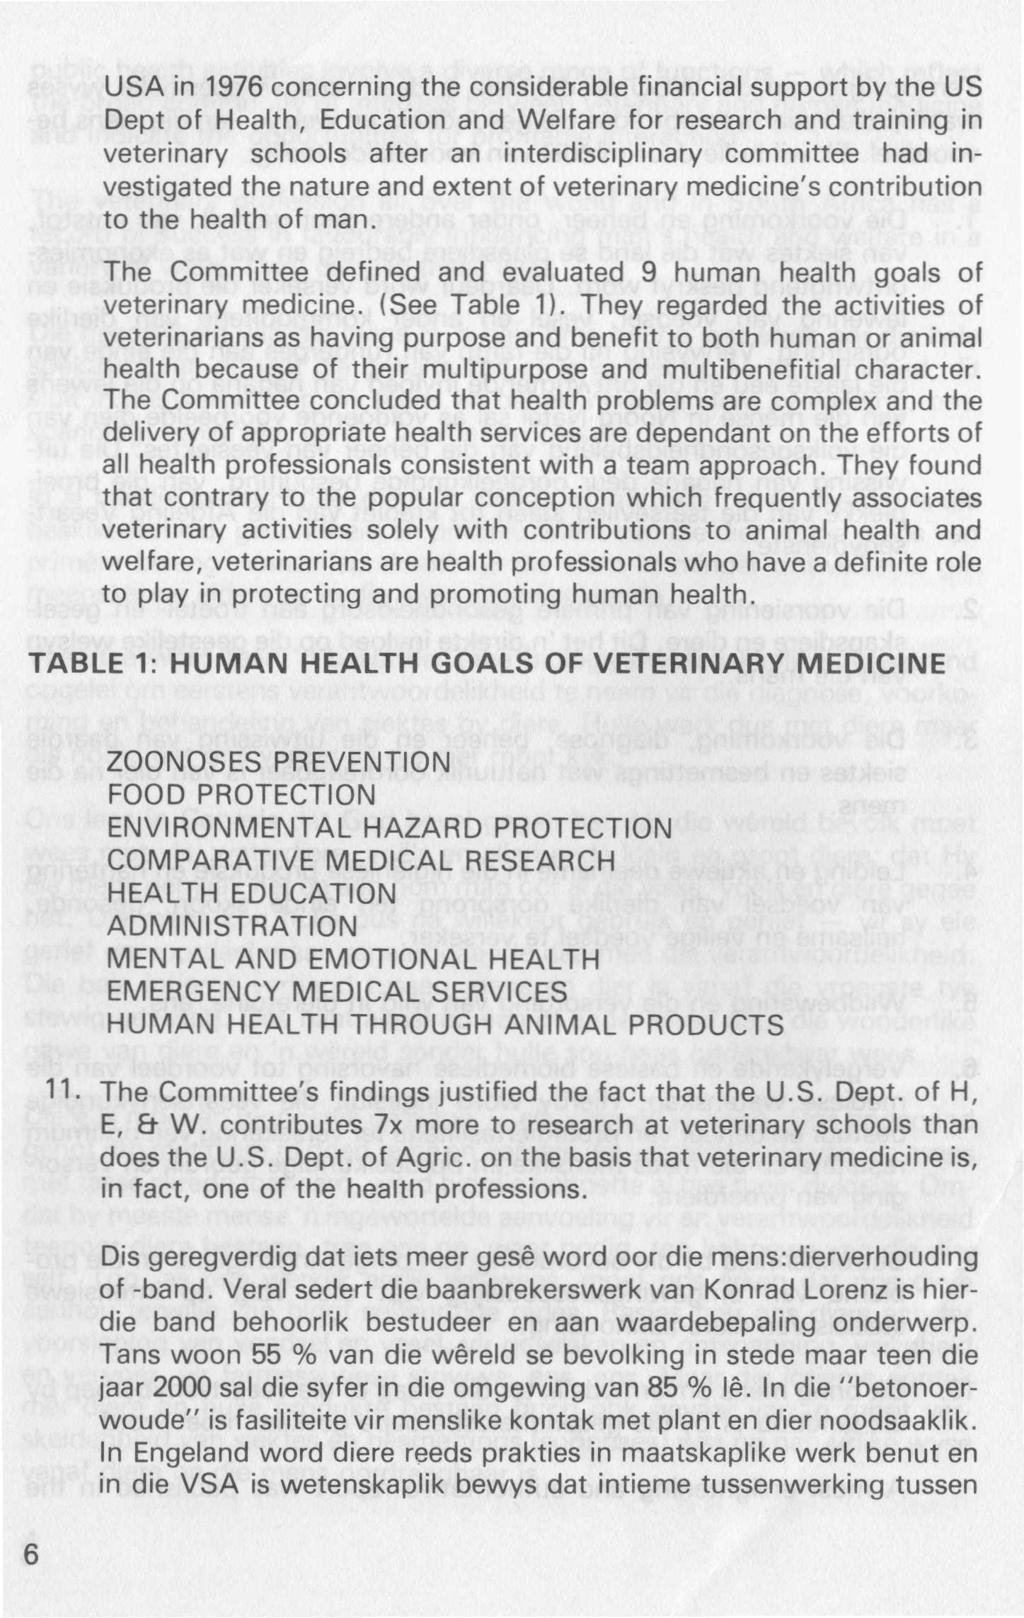 USA in 1976concerning the considerable financial support by the US Dept of Health, Education and Welfare for research and training in veterinary schools after an interdisciplinary committee had